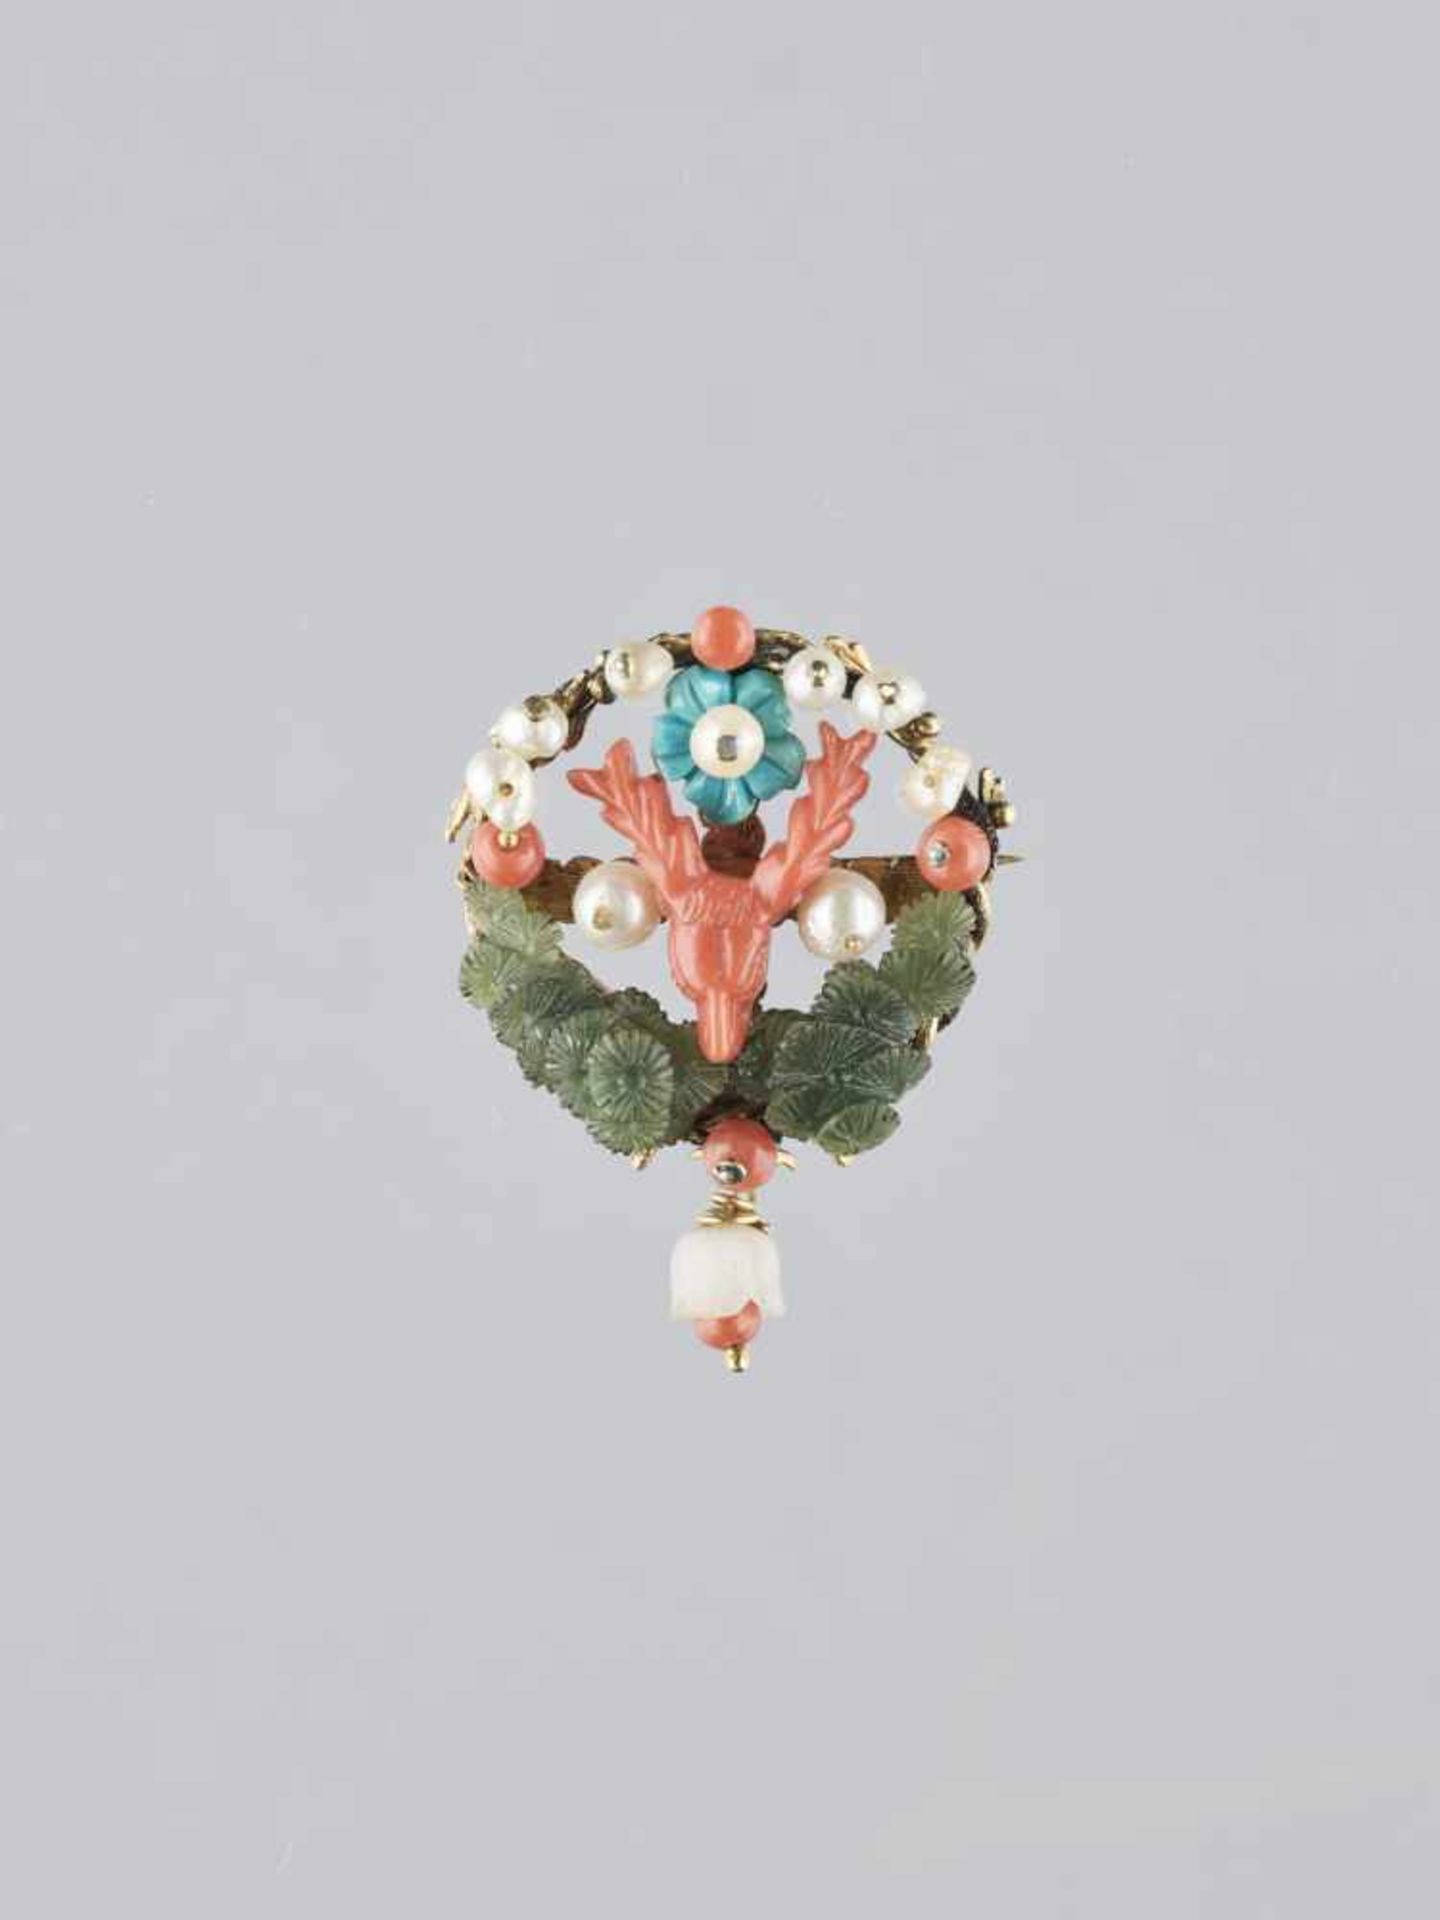 A 14K YELLOW GOLD, CORAL AND JADE ‘DEER’S HEAD’ BROOCH, c. 1900-1930